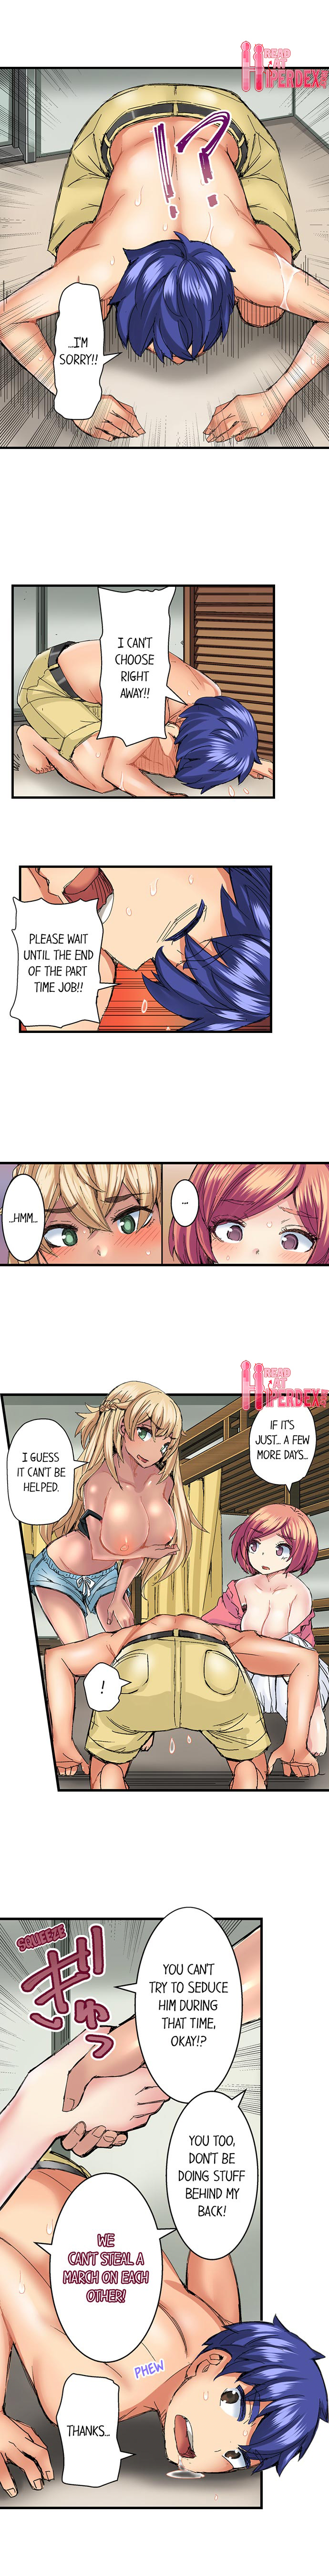 Taking a Hot Tanned Chick’s Virginity - Chapter 35 Page 2